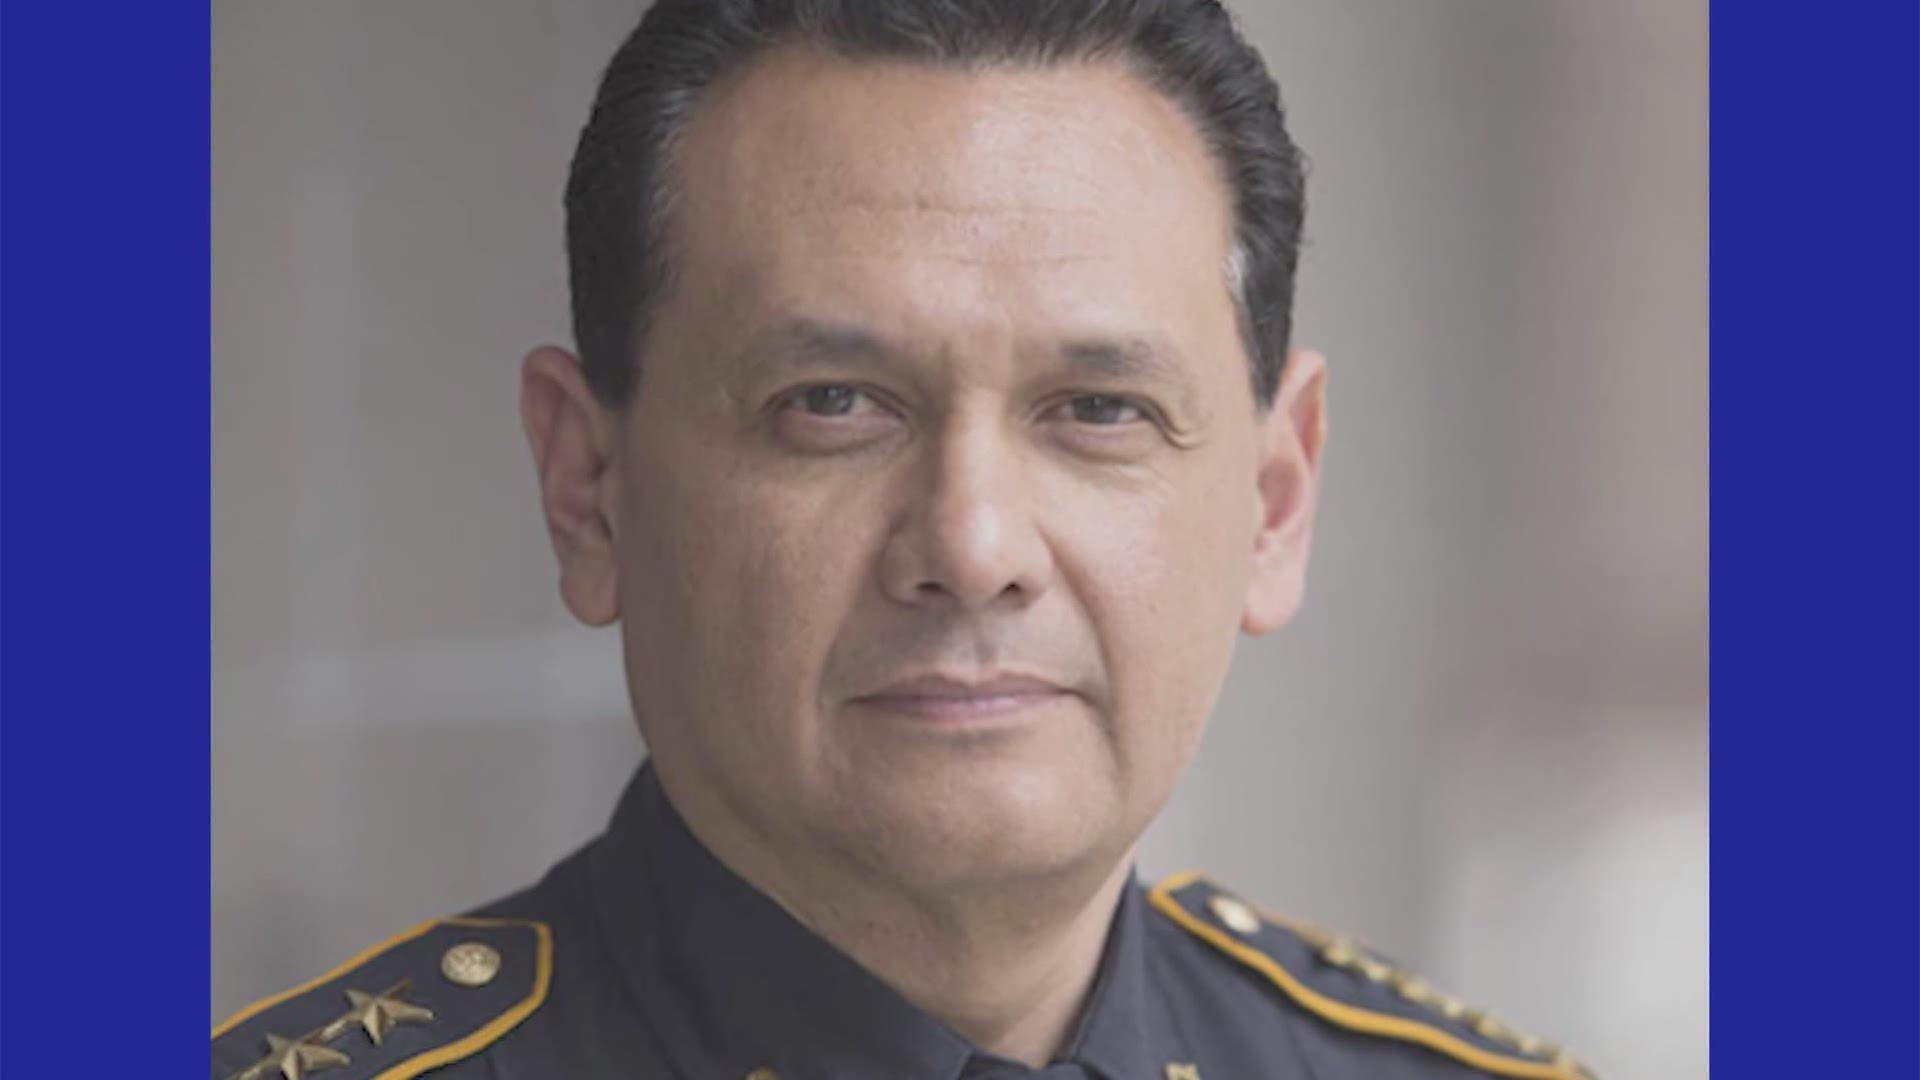 Harris County Sheriff Ed Gonzalez has been nominated to become the Director of Immigration and Customs Enforcement.